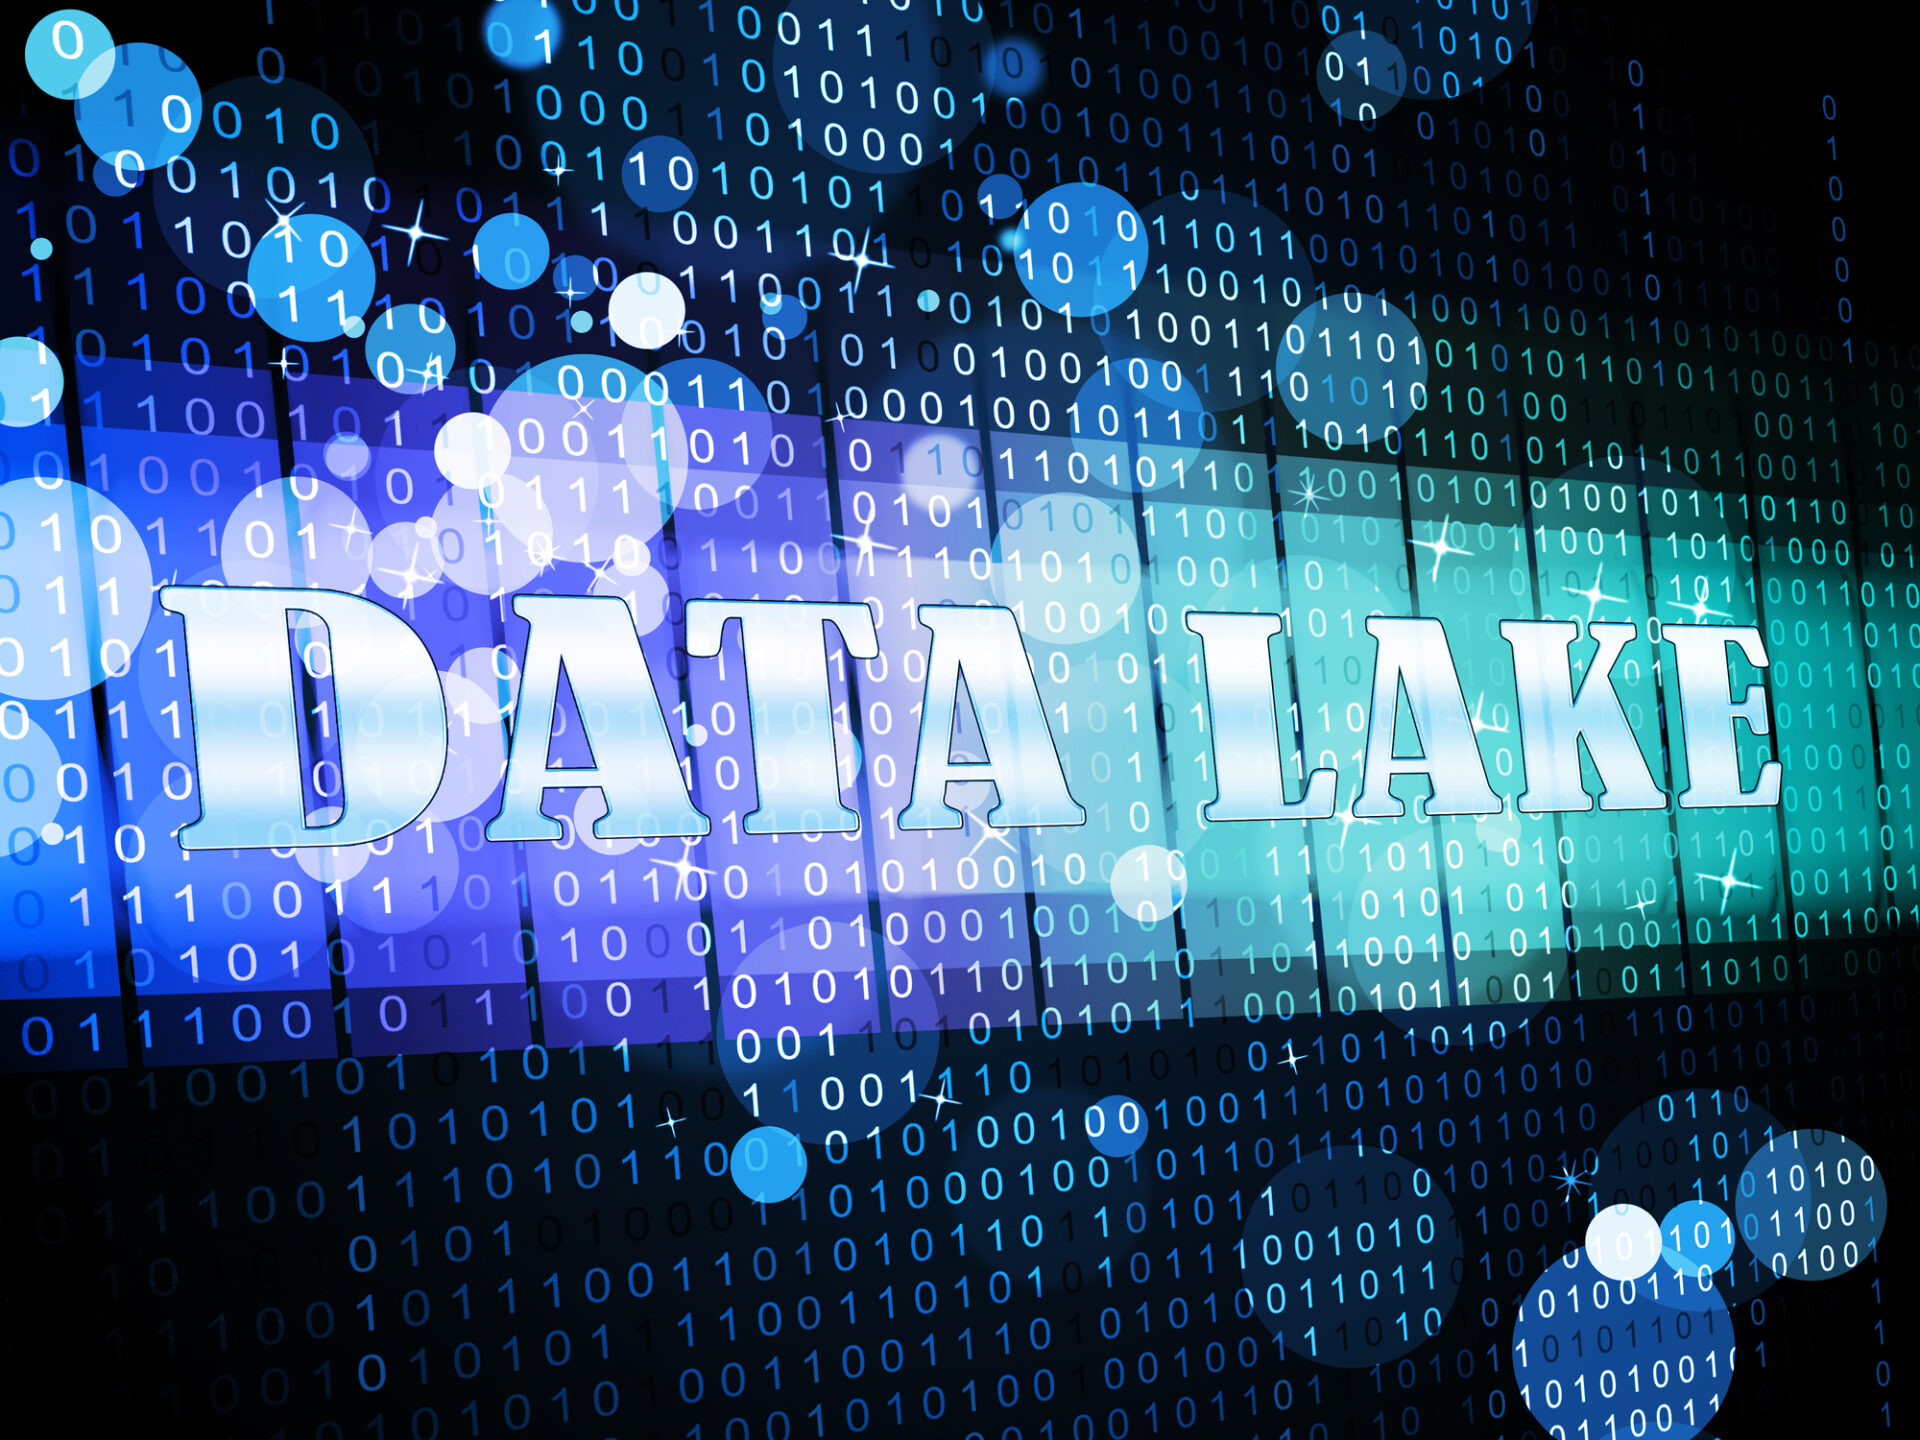 1s and 0s behind the phrase “data lake,” showing what a data lake is